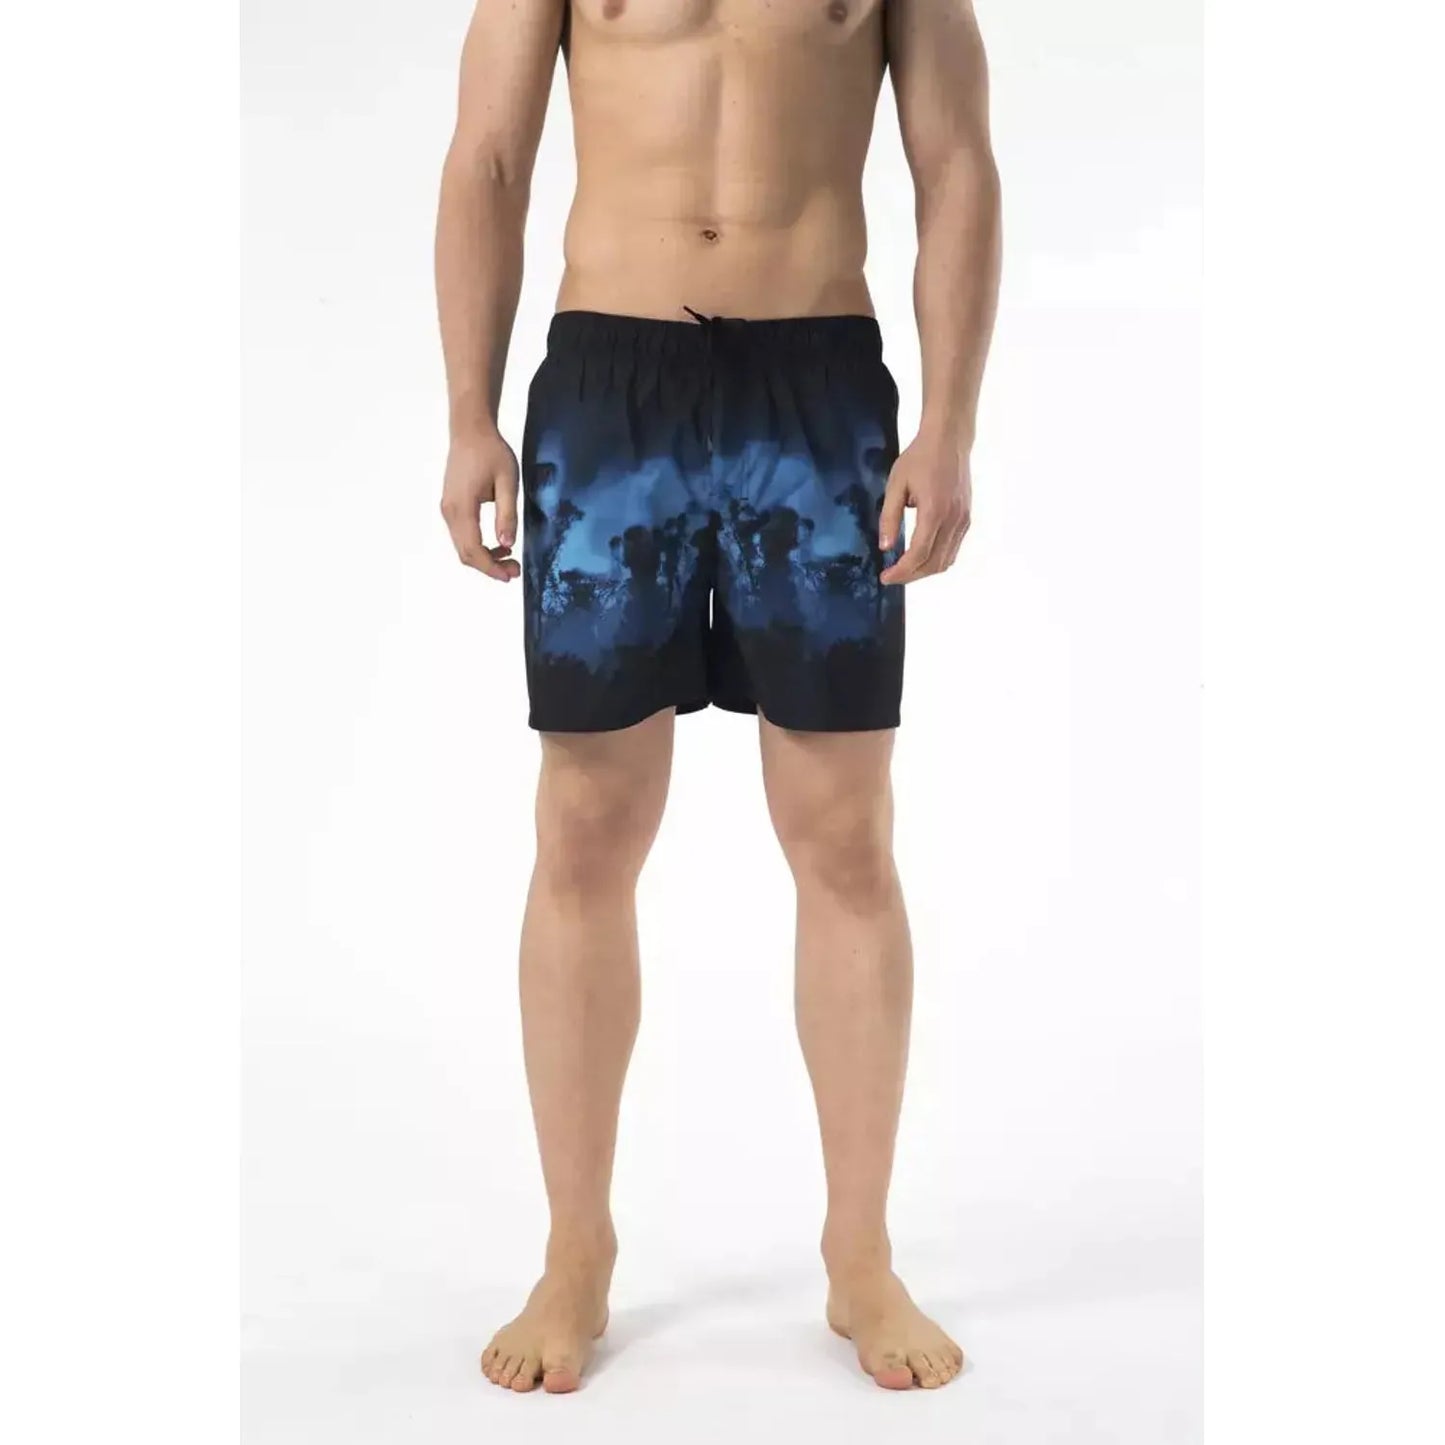 Just Cavalli Chic Printed Beach Shorts with Embroidered Logo black-swimwear-1 product-22578-1265765881-30-d31ea0a4-75a.webp